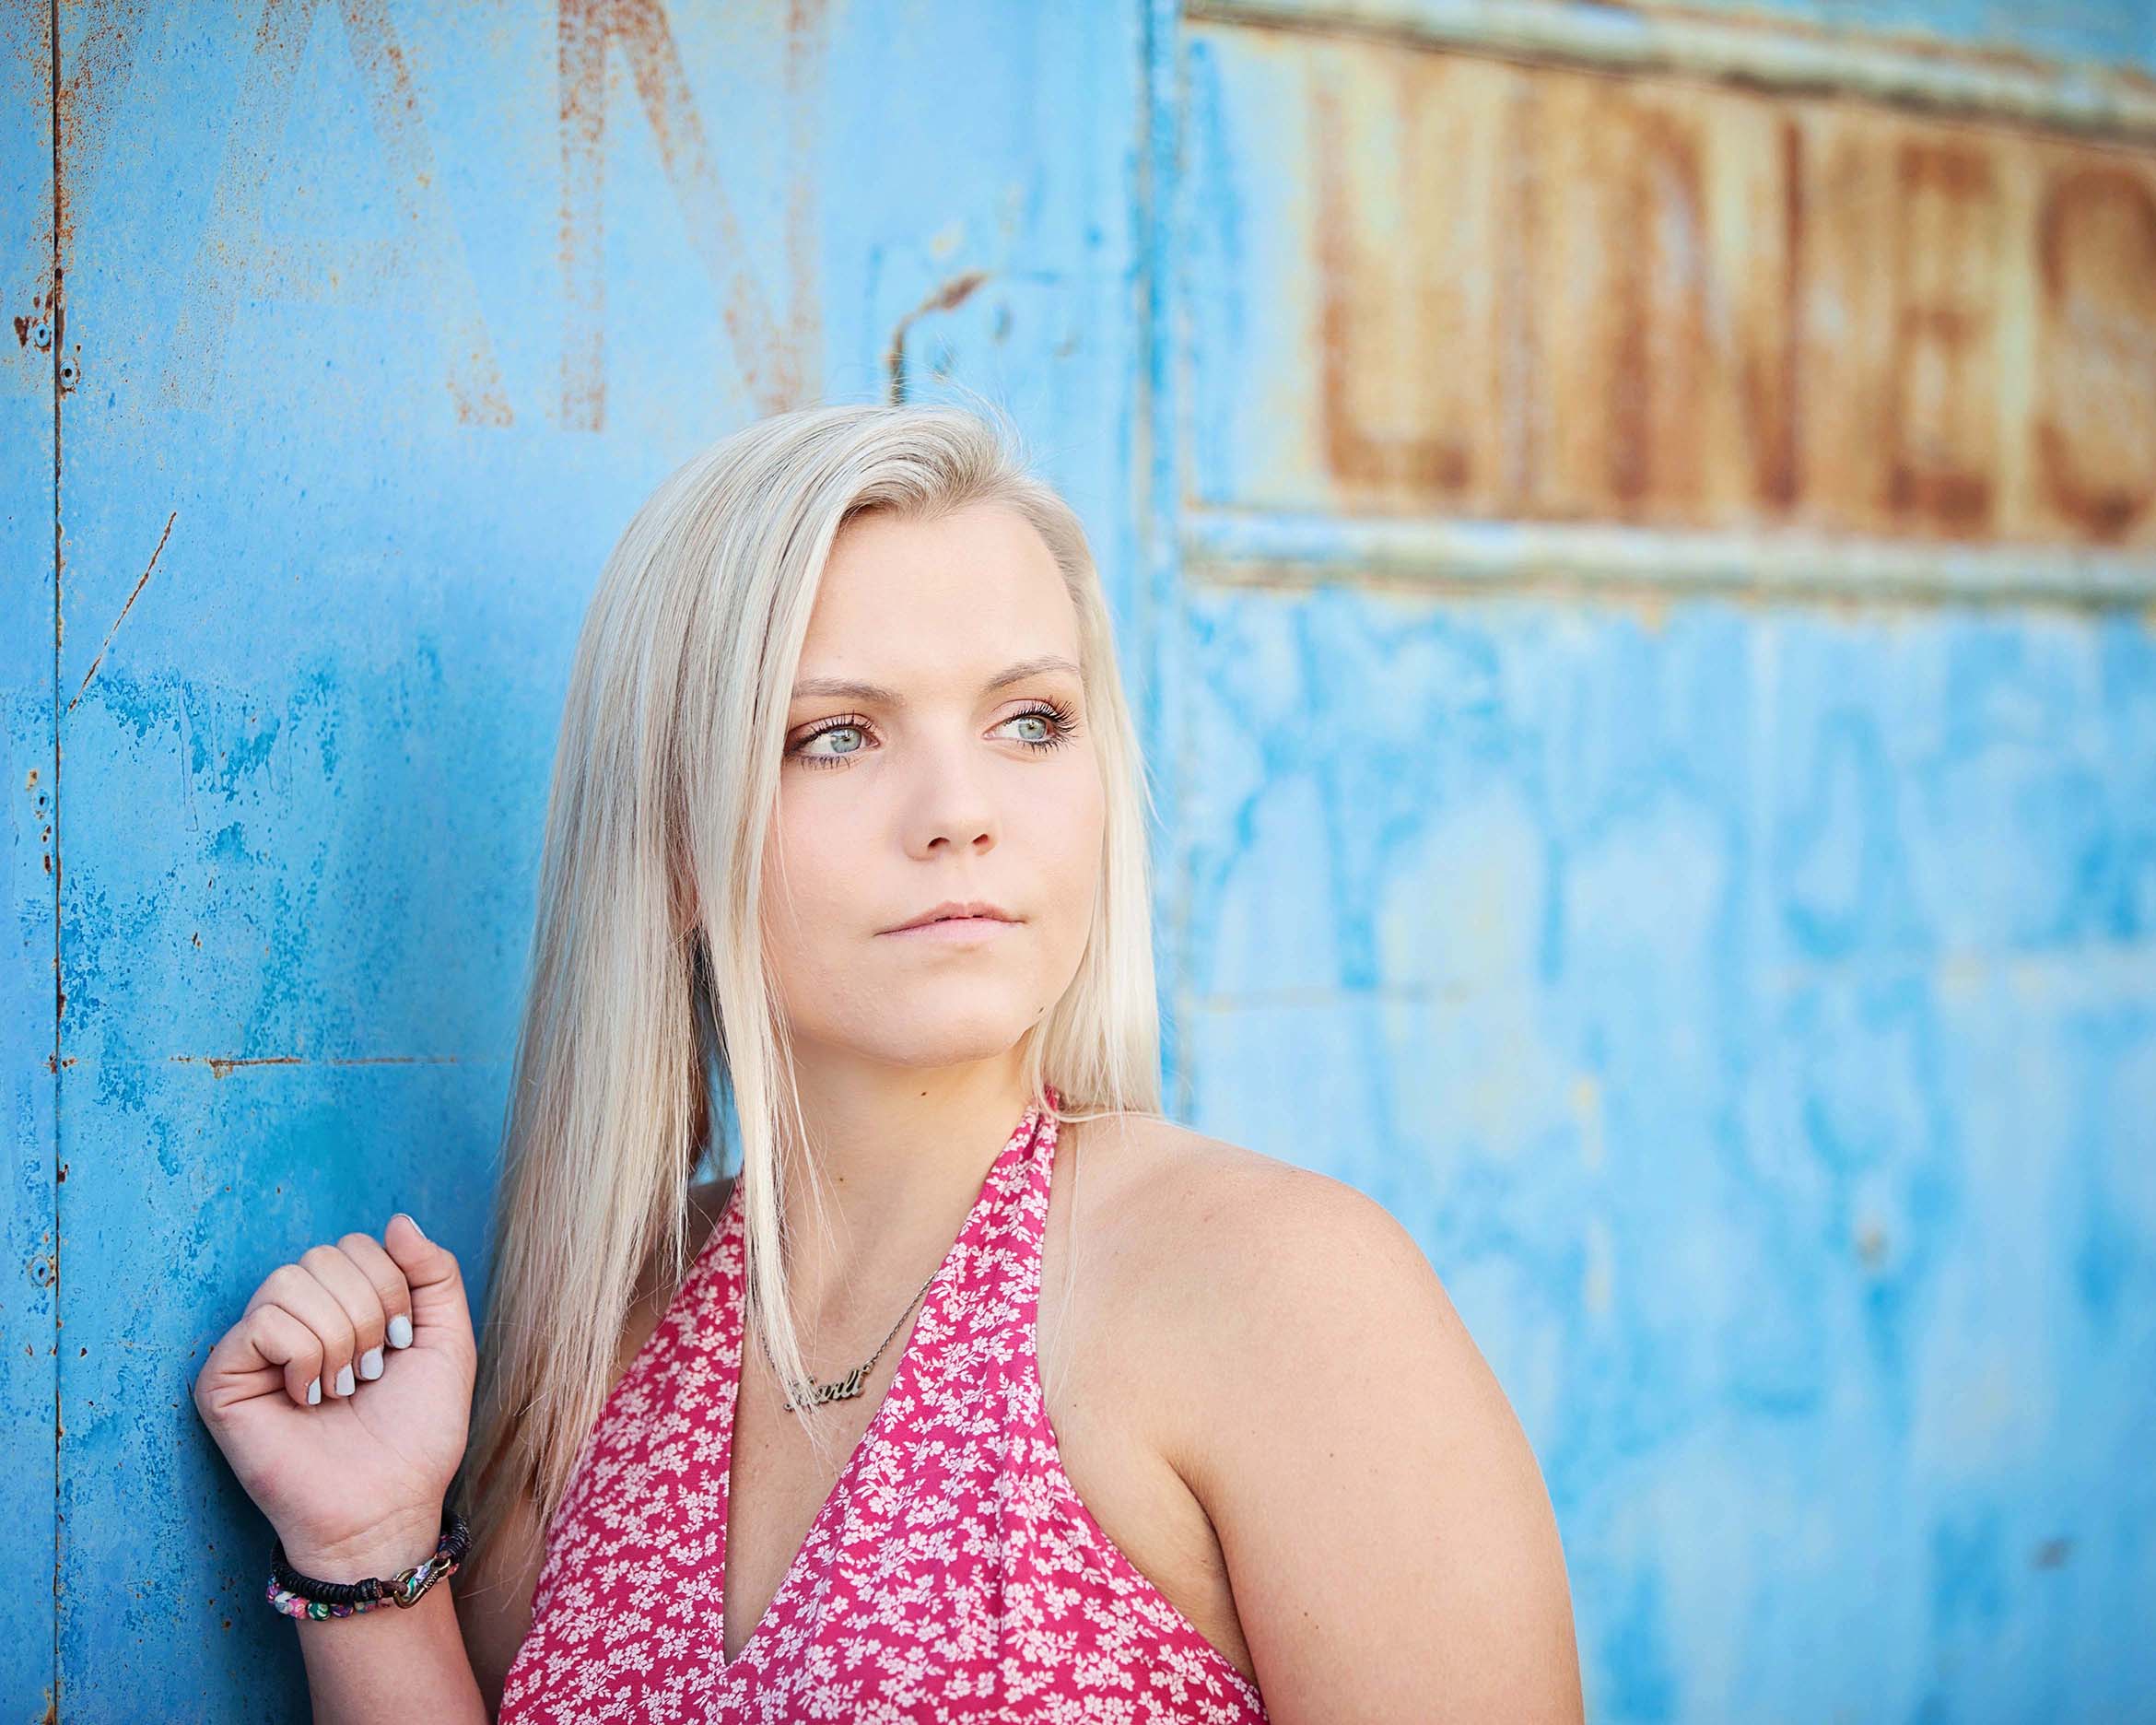 6 Tips To Help You Look Confident In Your Senior Photos